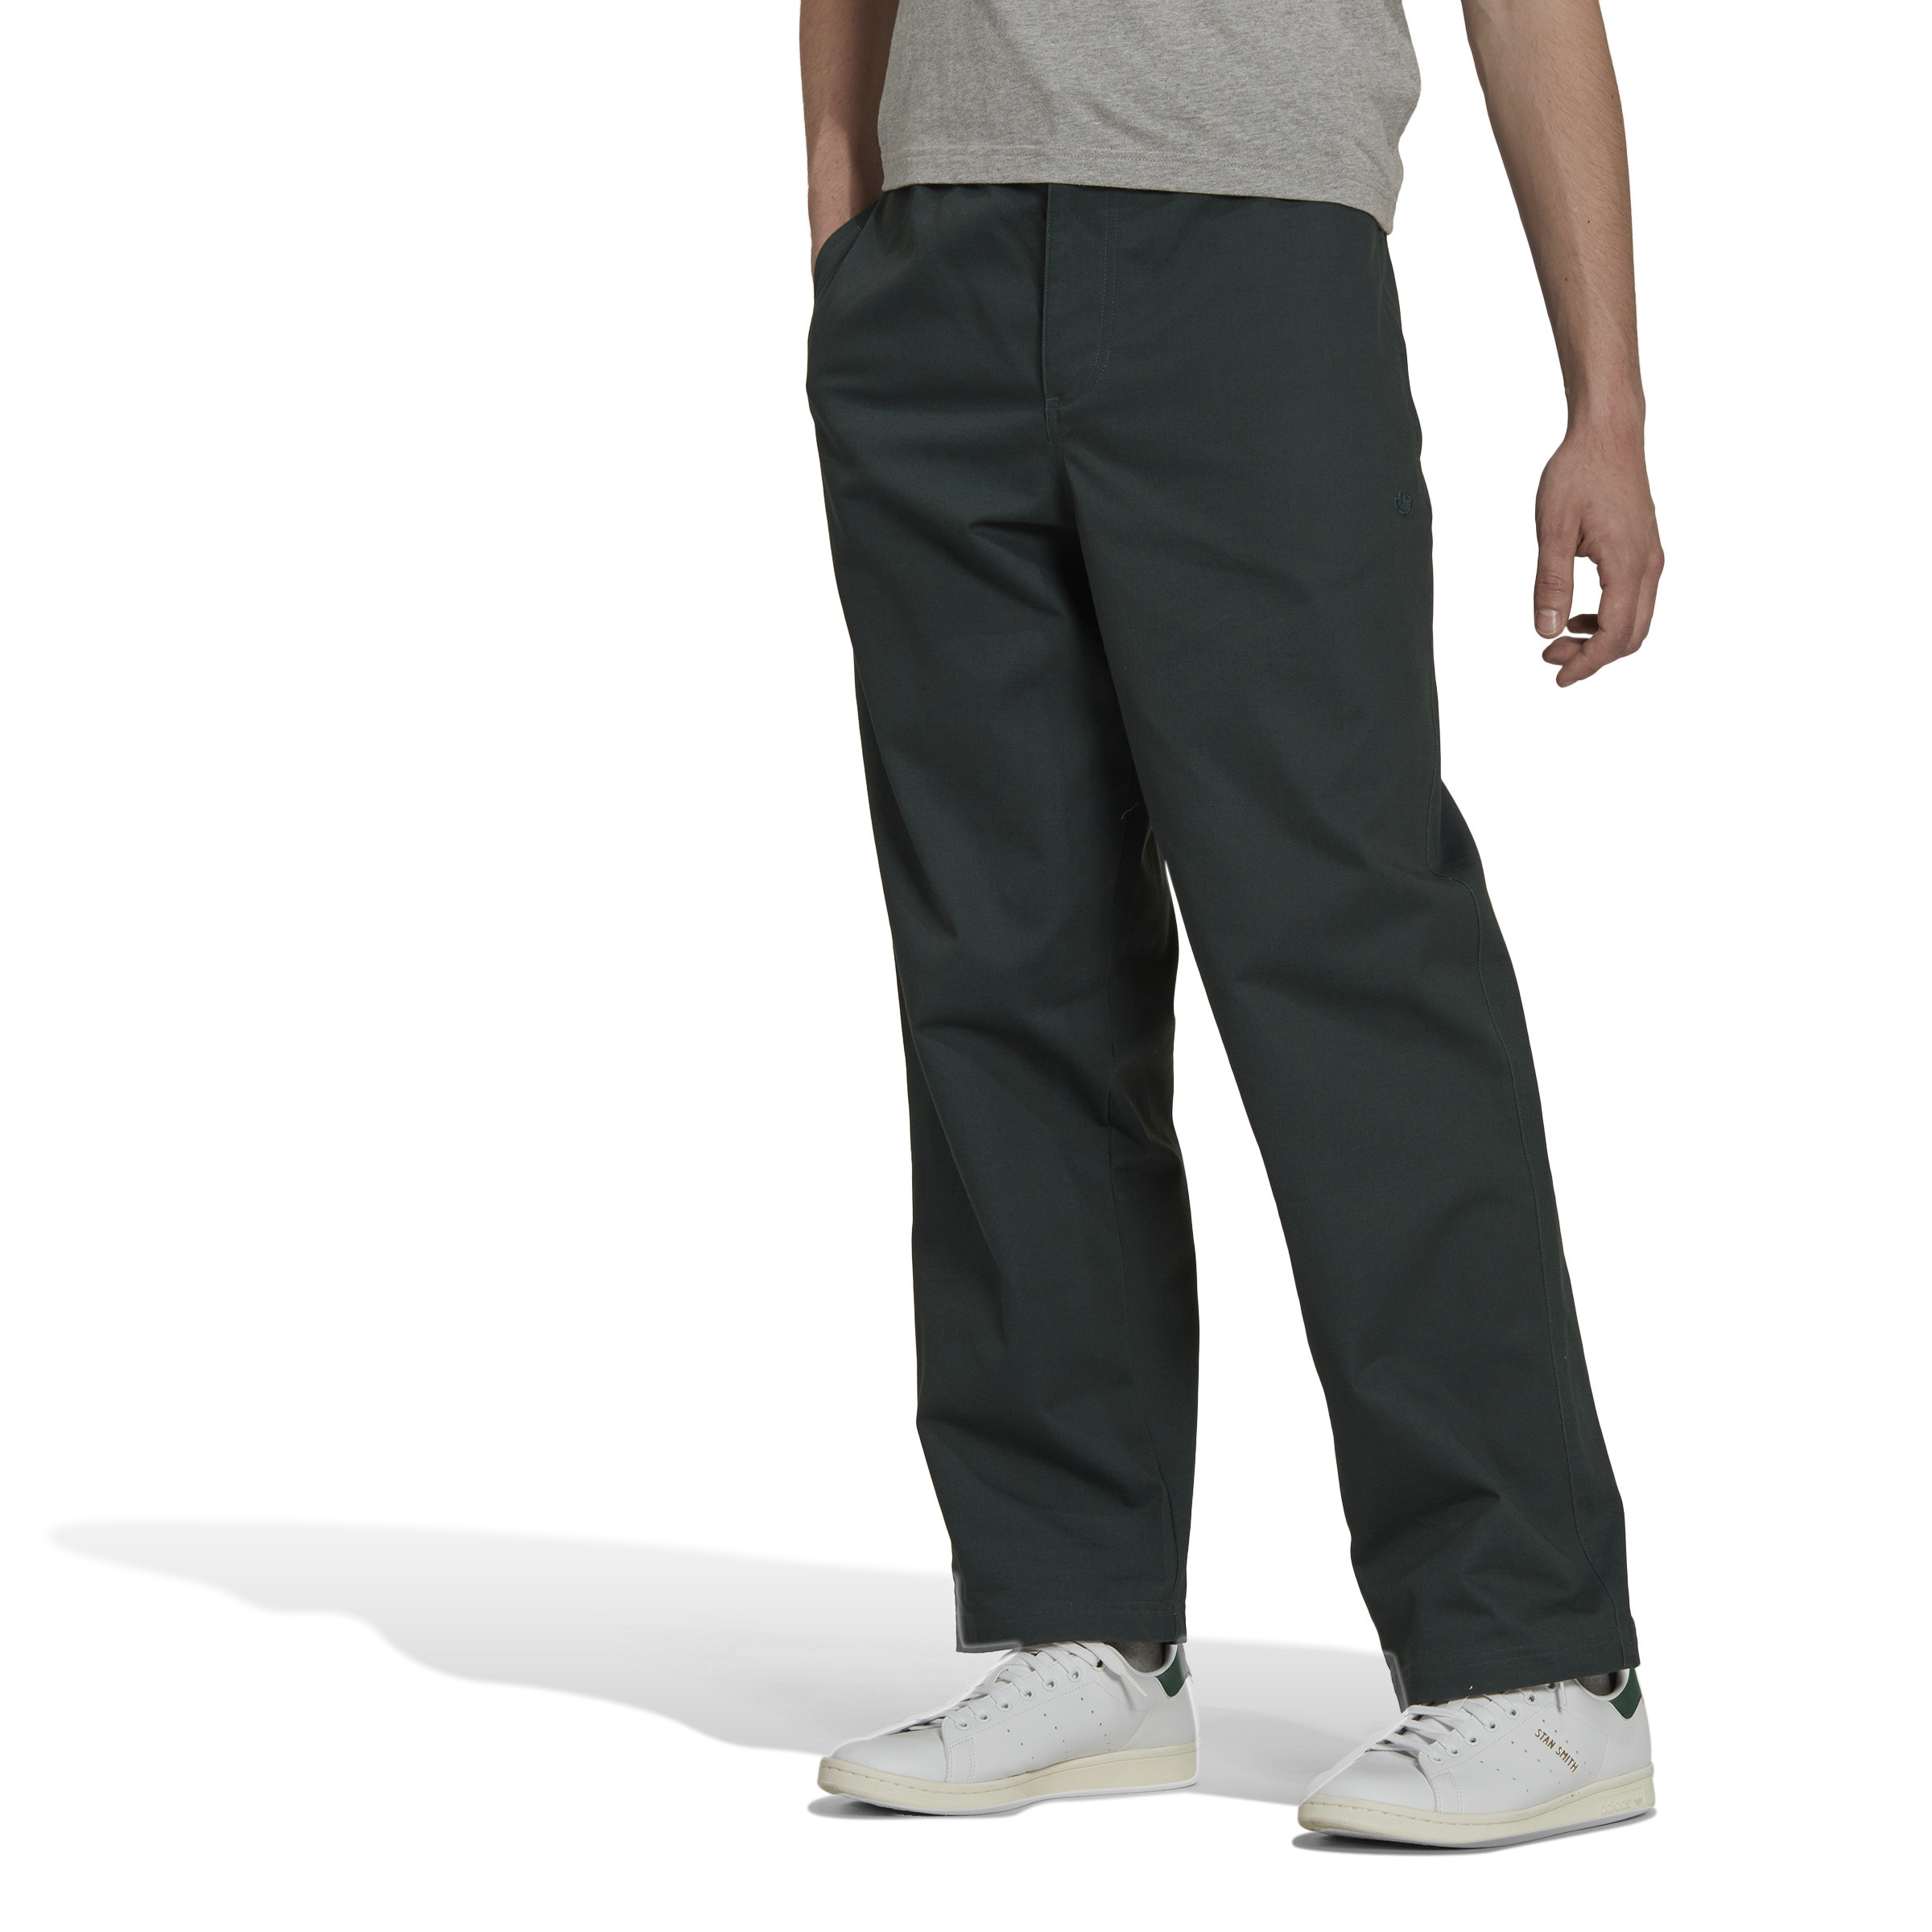 Adidas - Chino adicolor trousers, Dark Green, large image number 1